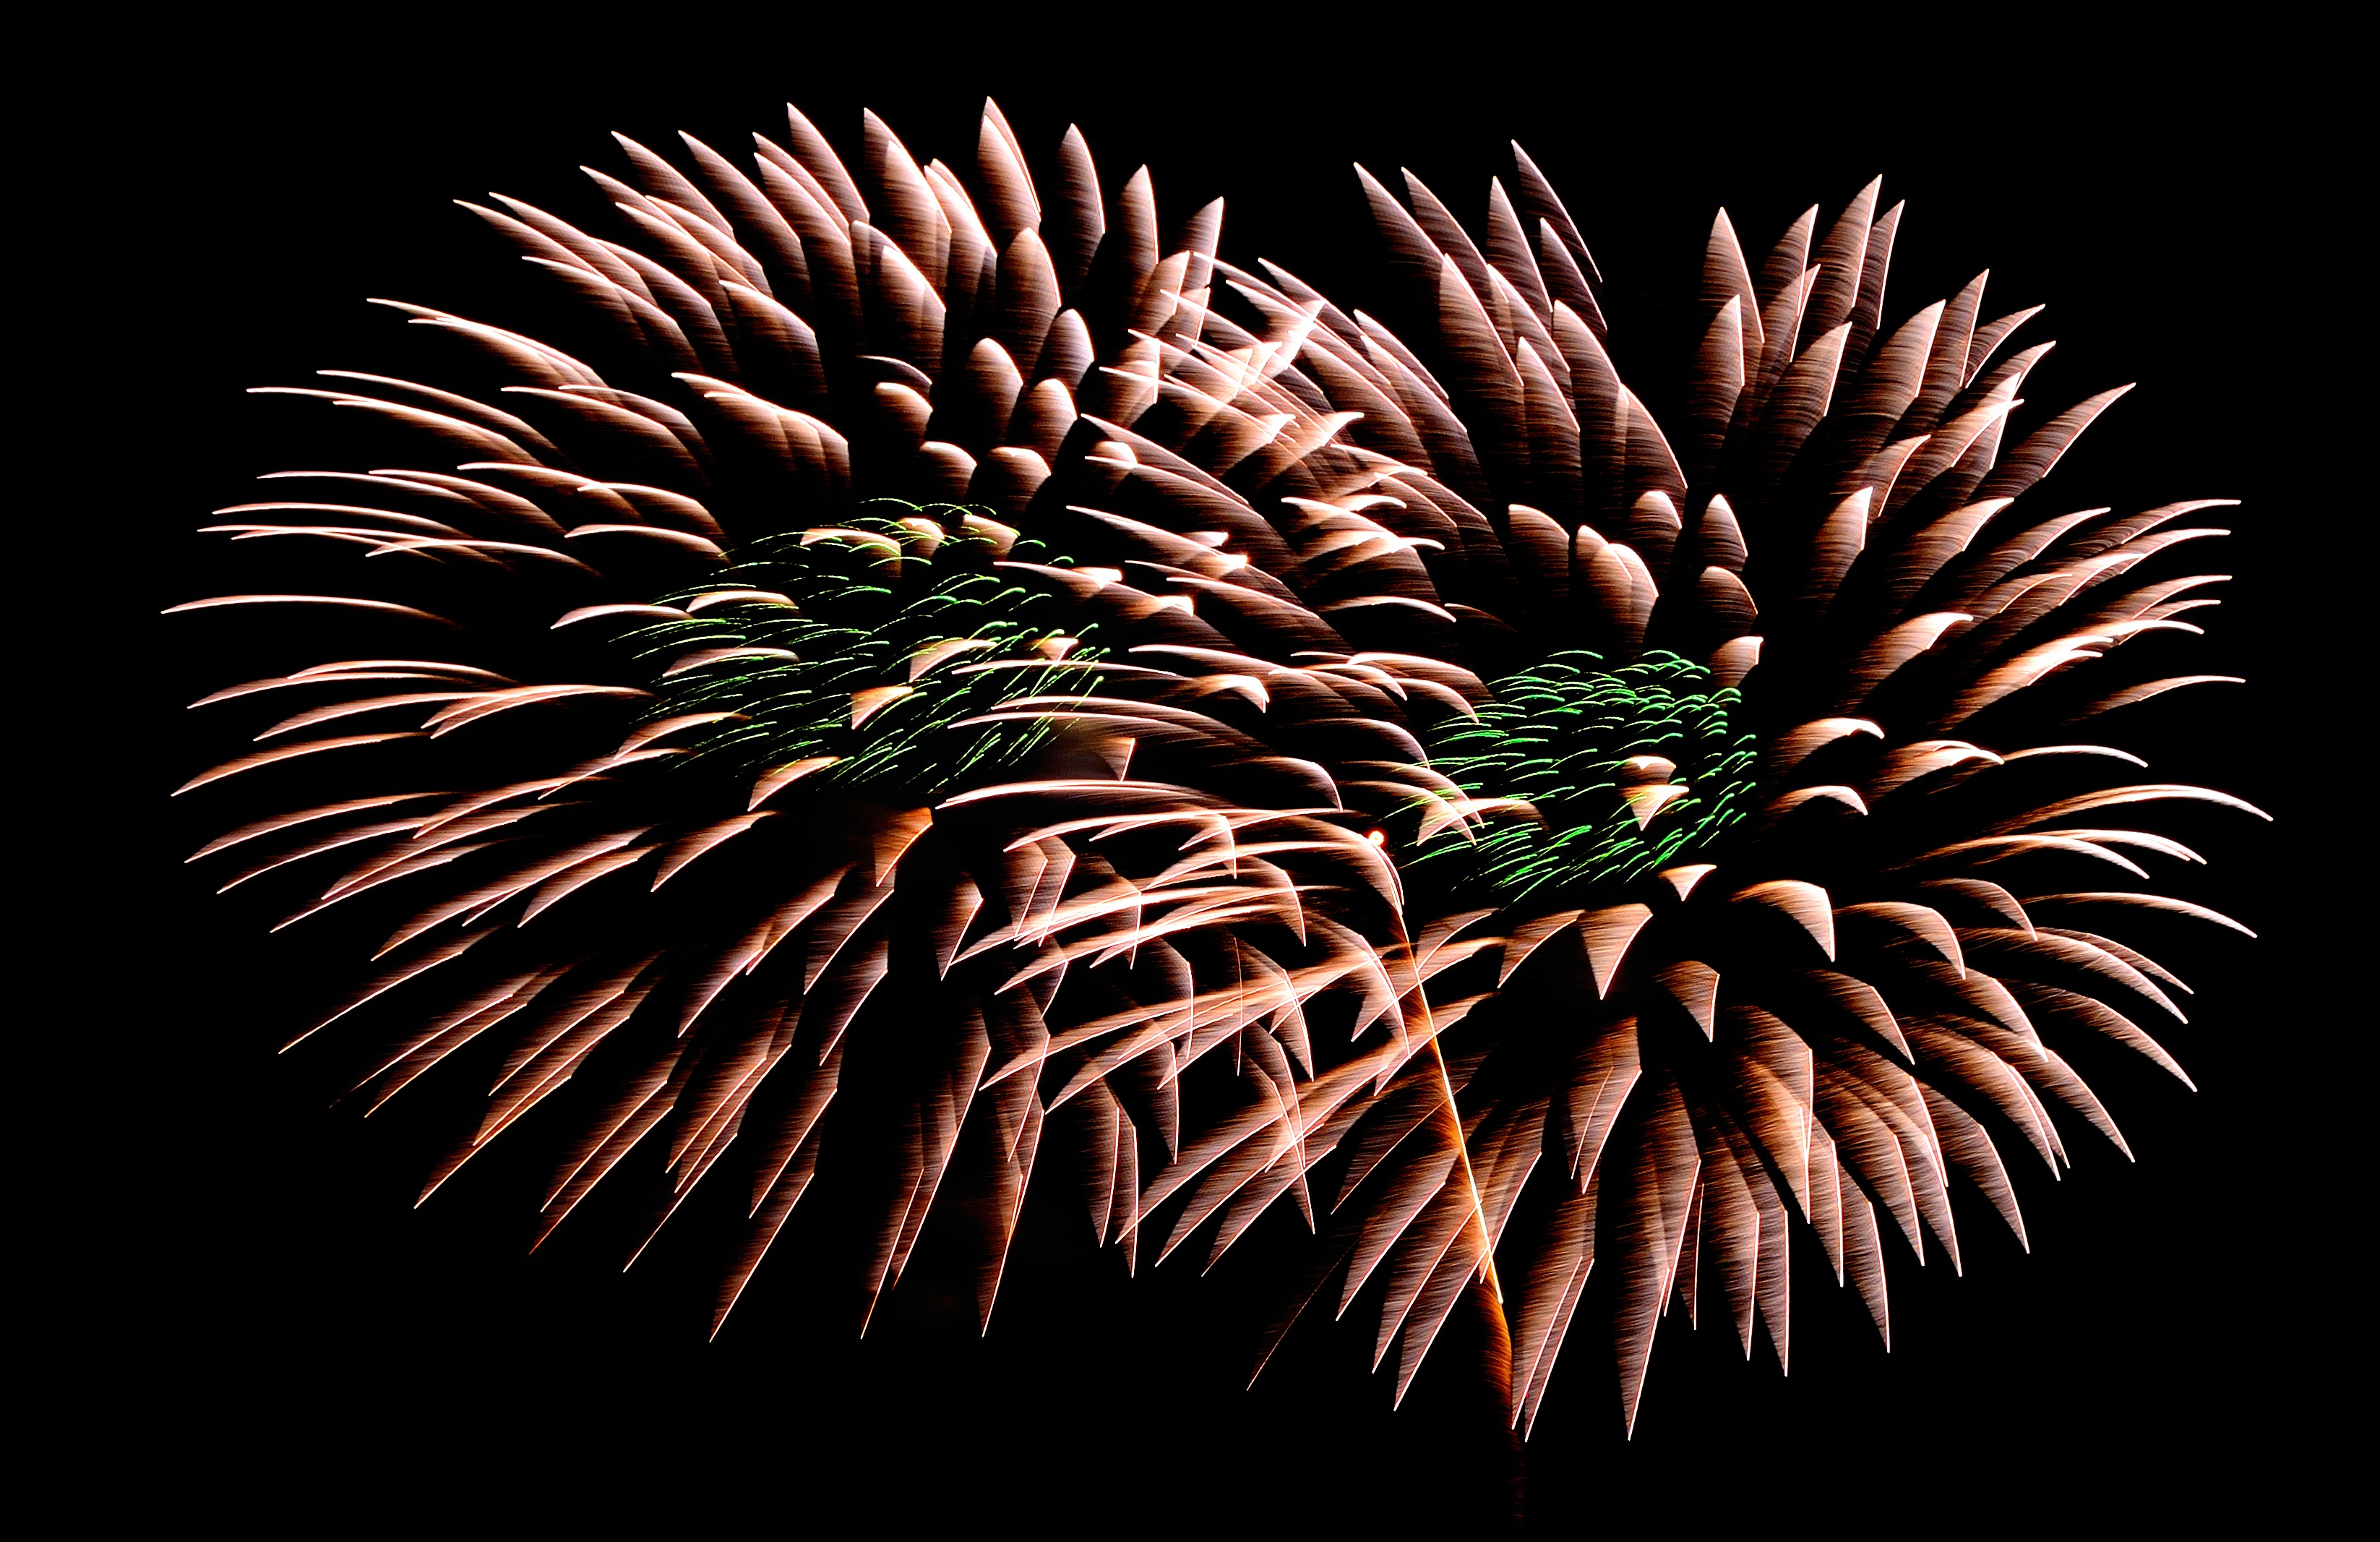 Photo of fireworks for an article about local fireworks displays.